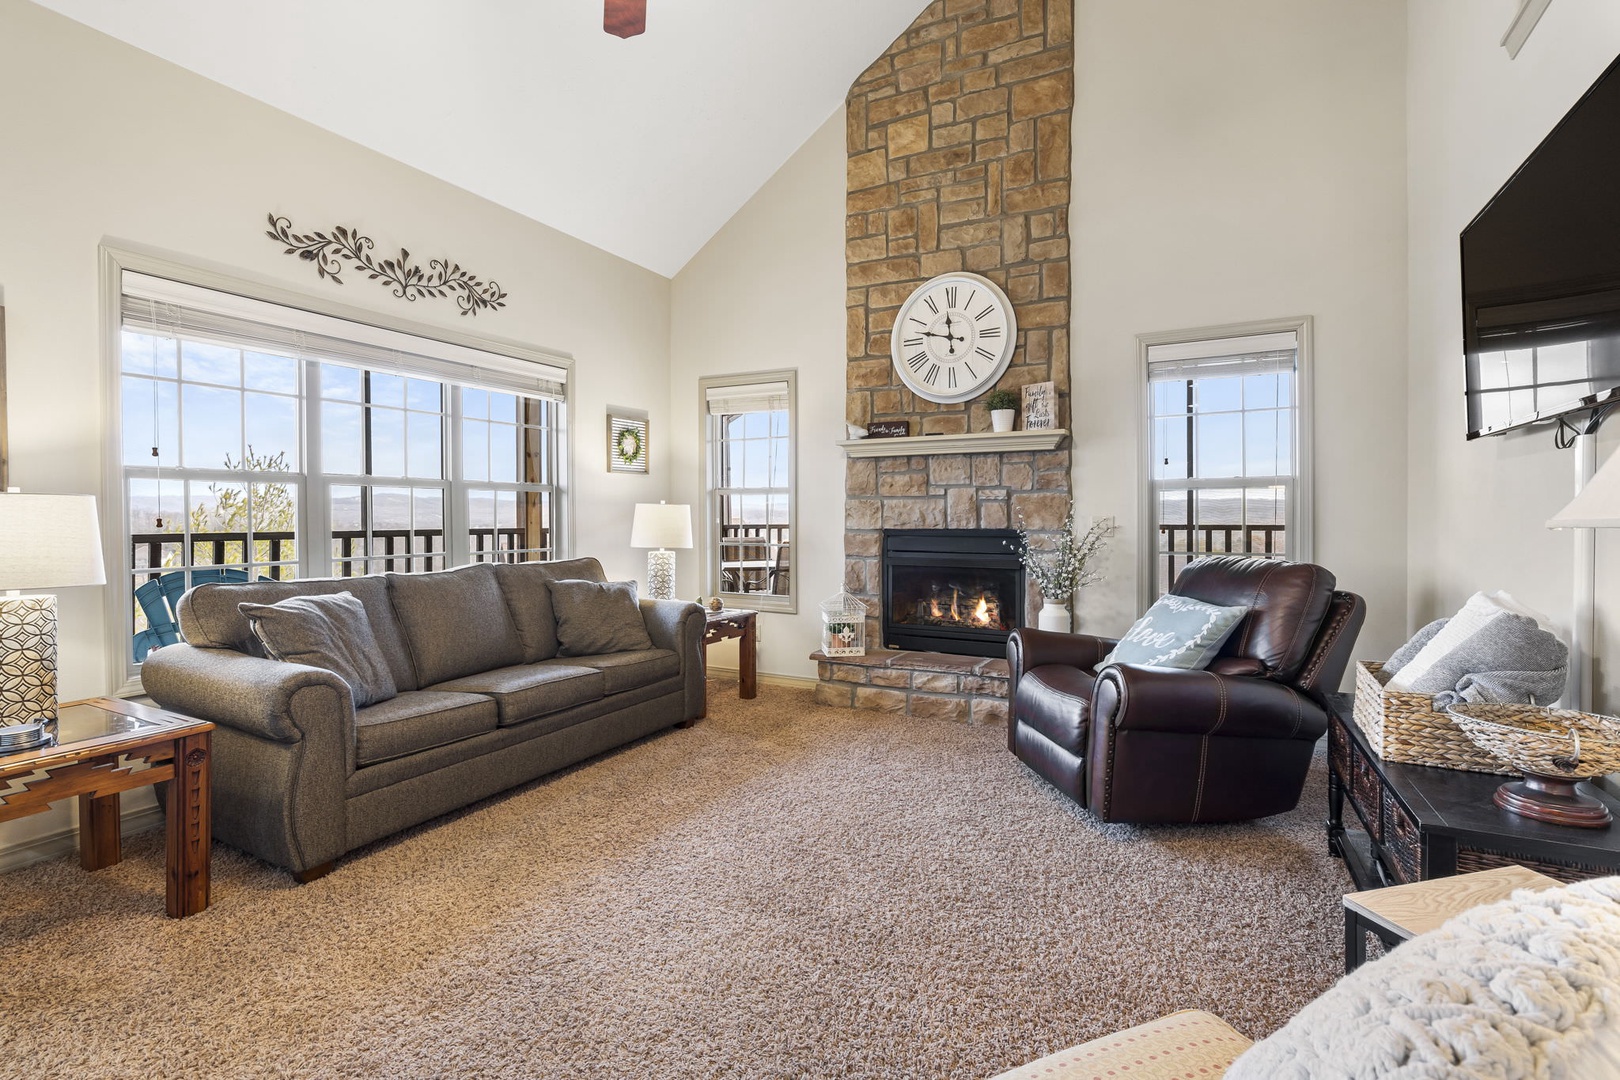 Open living space with, sofa sleeper, Smart TV, fireplace, and screened deck access